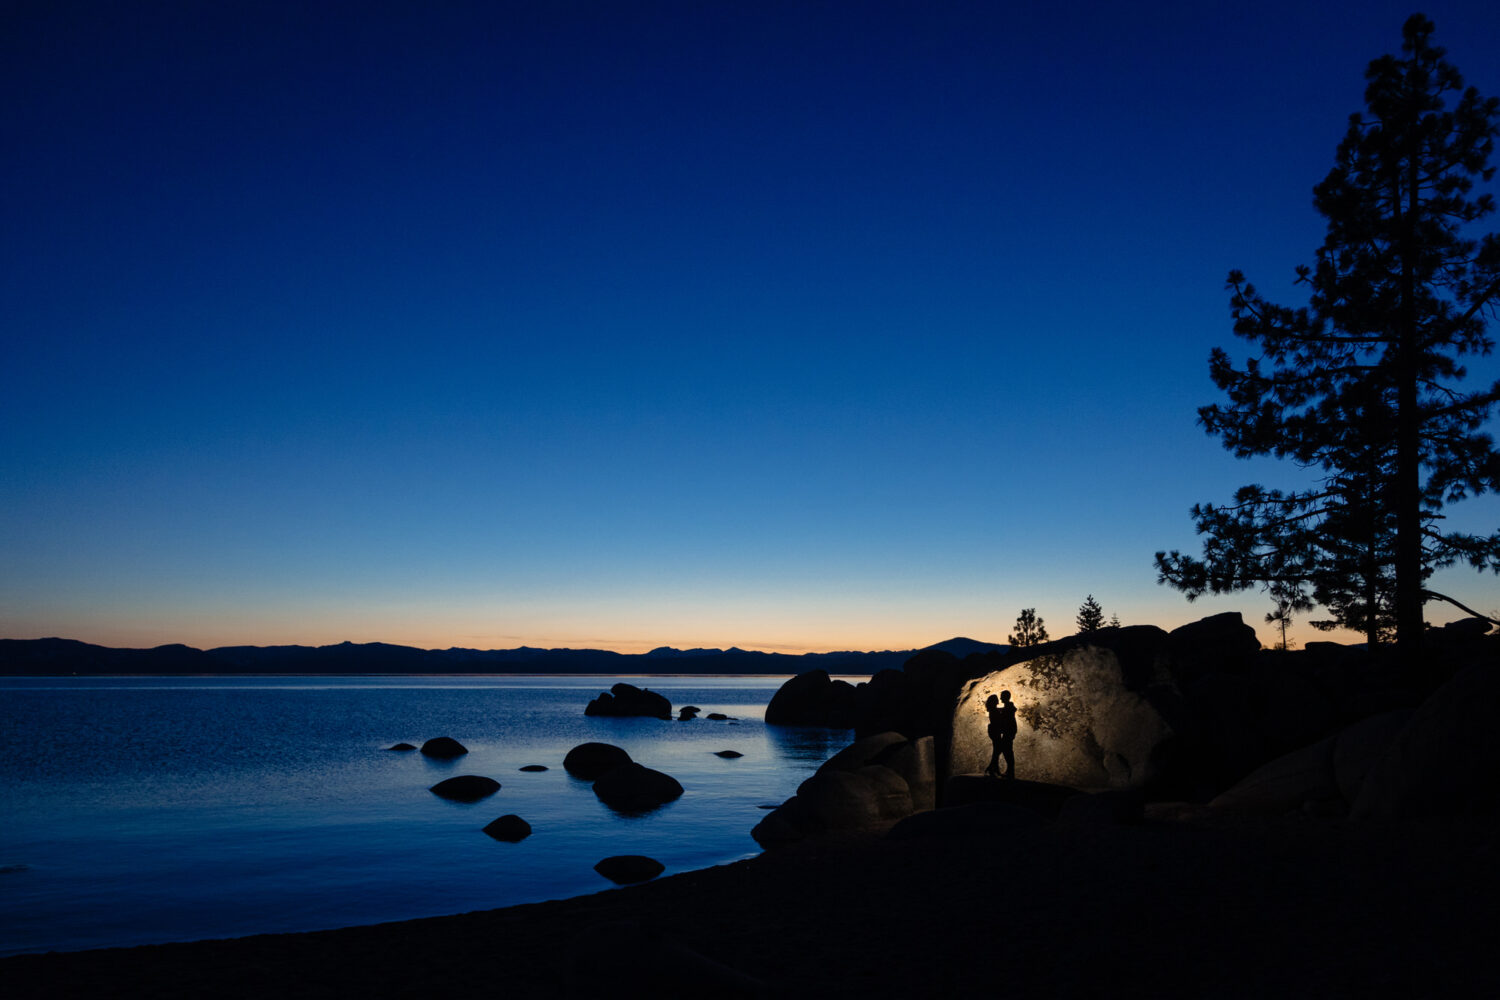 Artistic silhouette of a couple at dusk in front of Lake Tahoe.